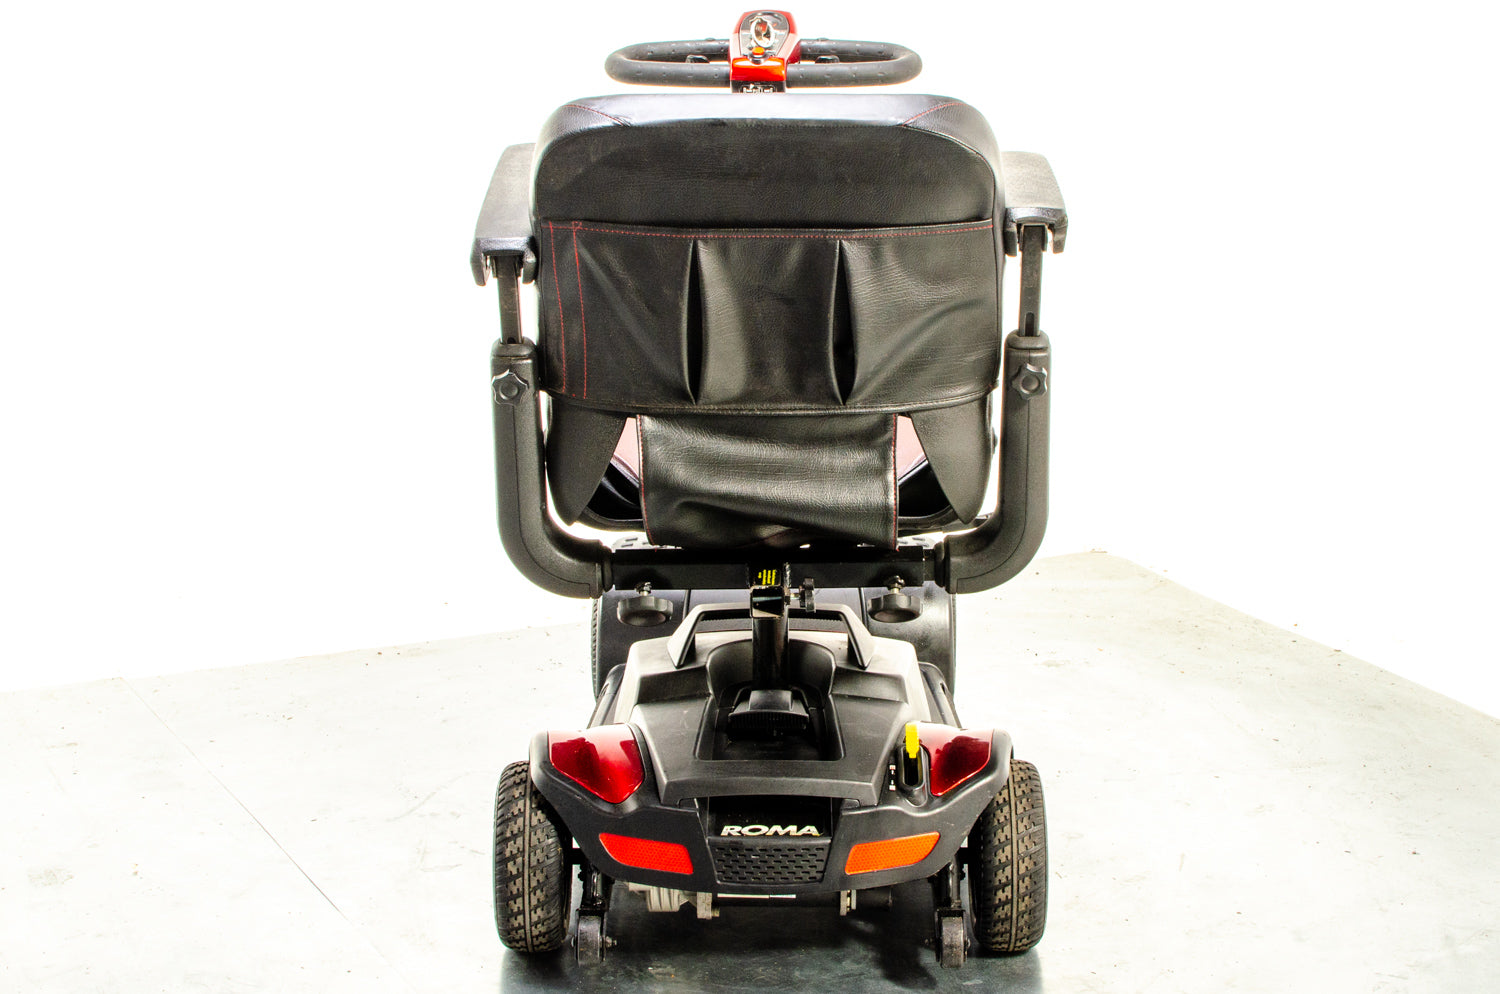 Monarch Mighty Mini 4mph Used Mobility Scooter Transportable Small Lightweight Boot Suspension in Red